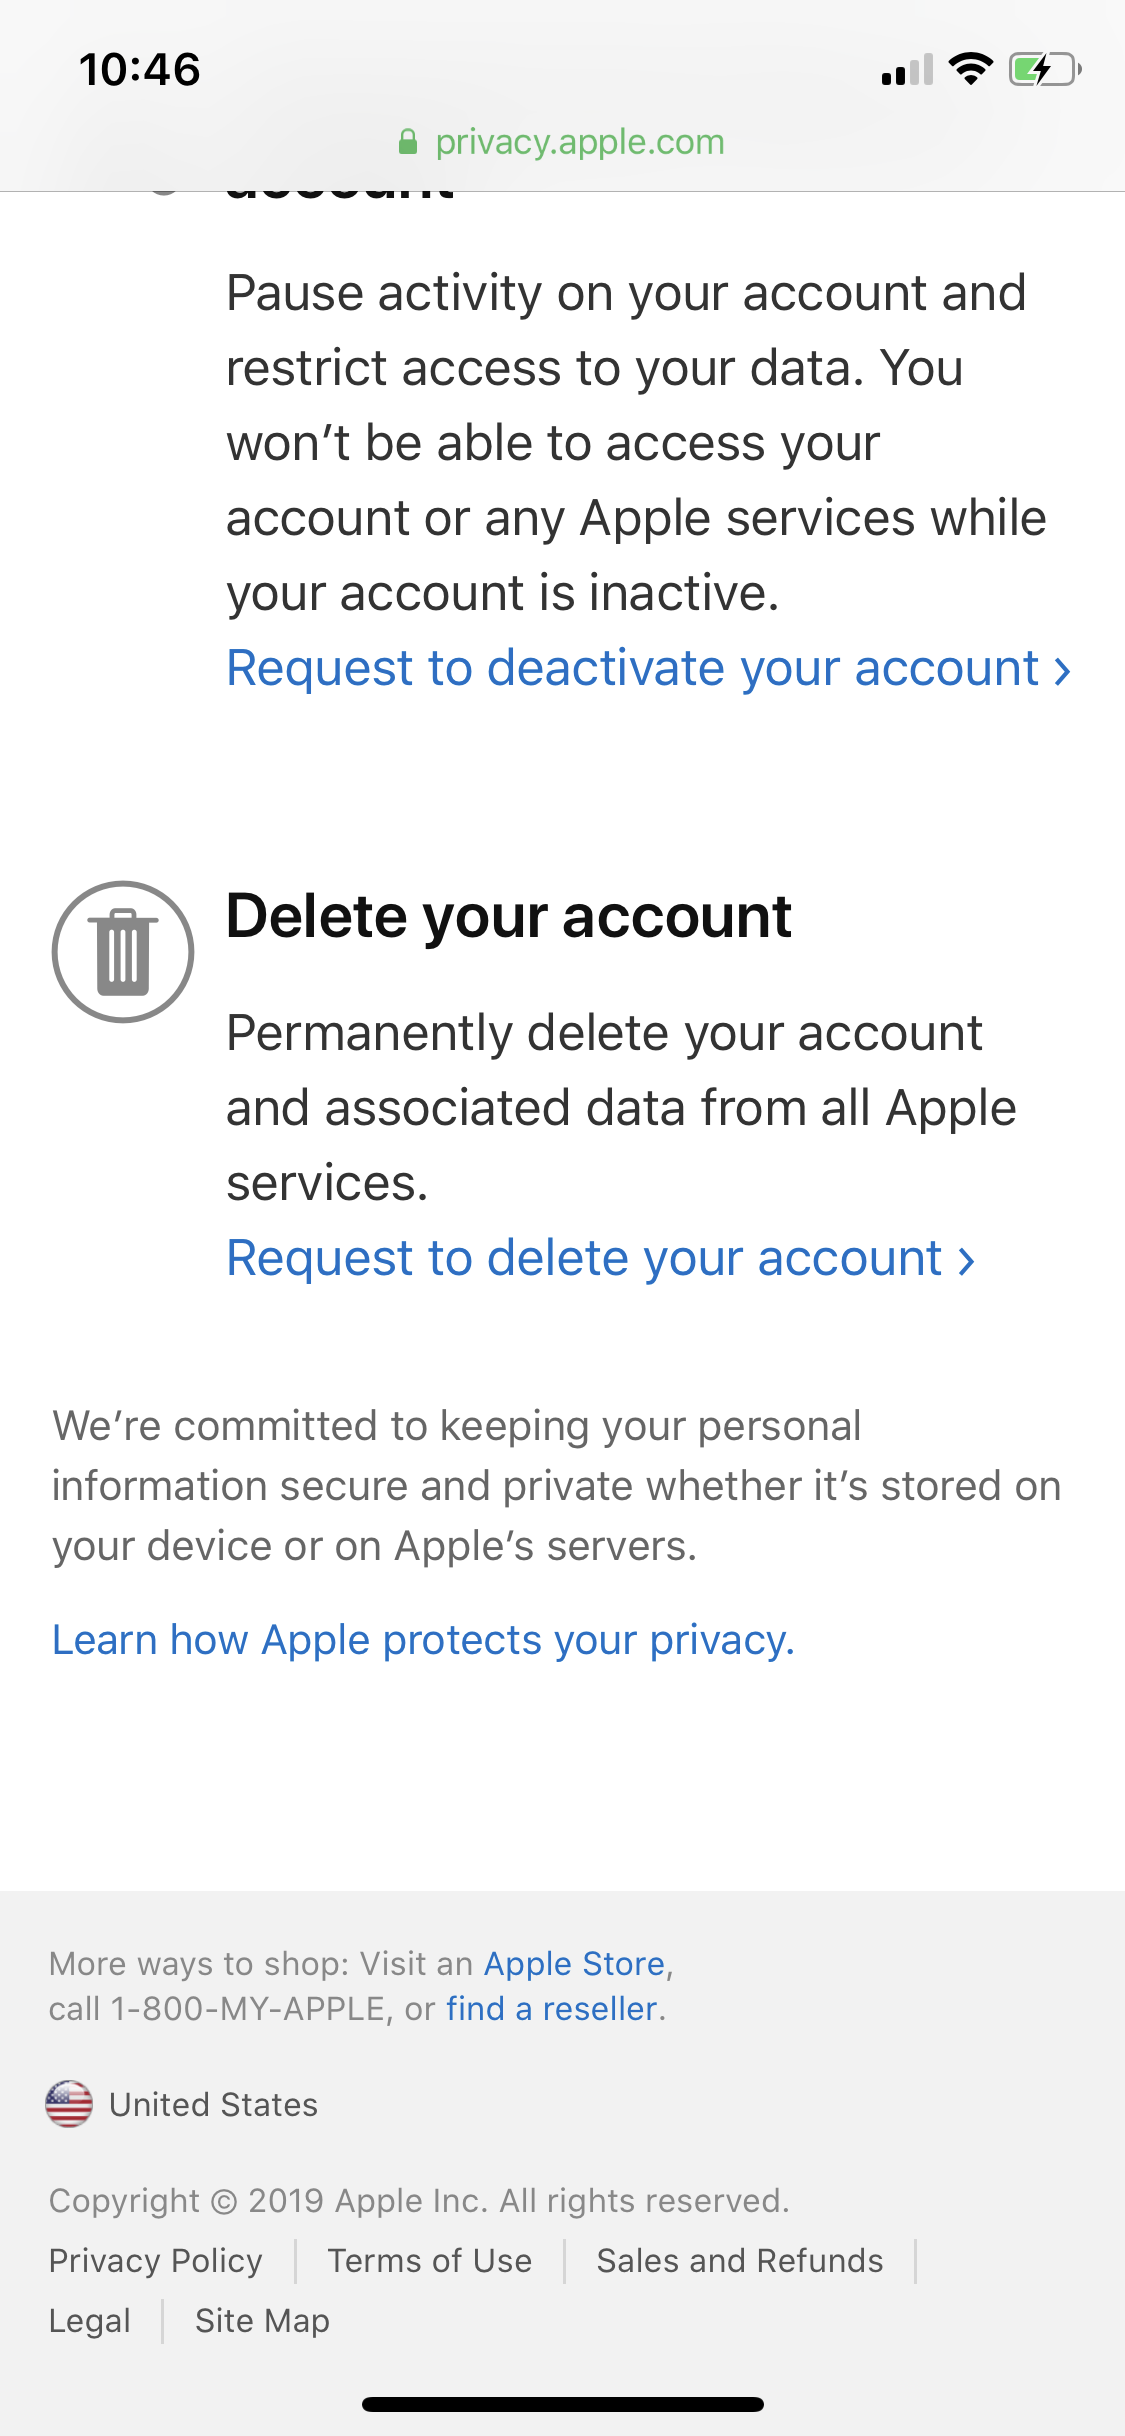 How long does it take to delete an Apple ID?